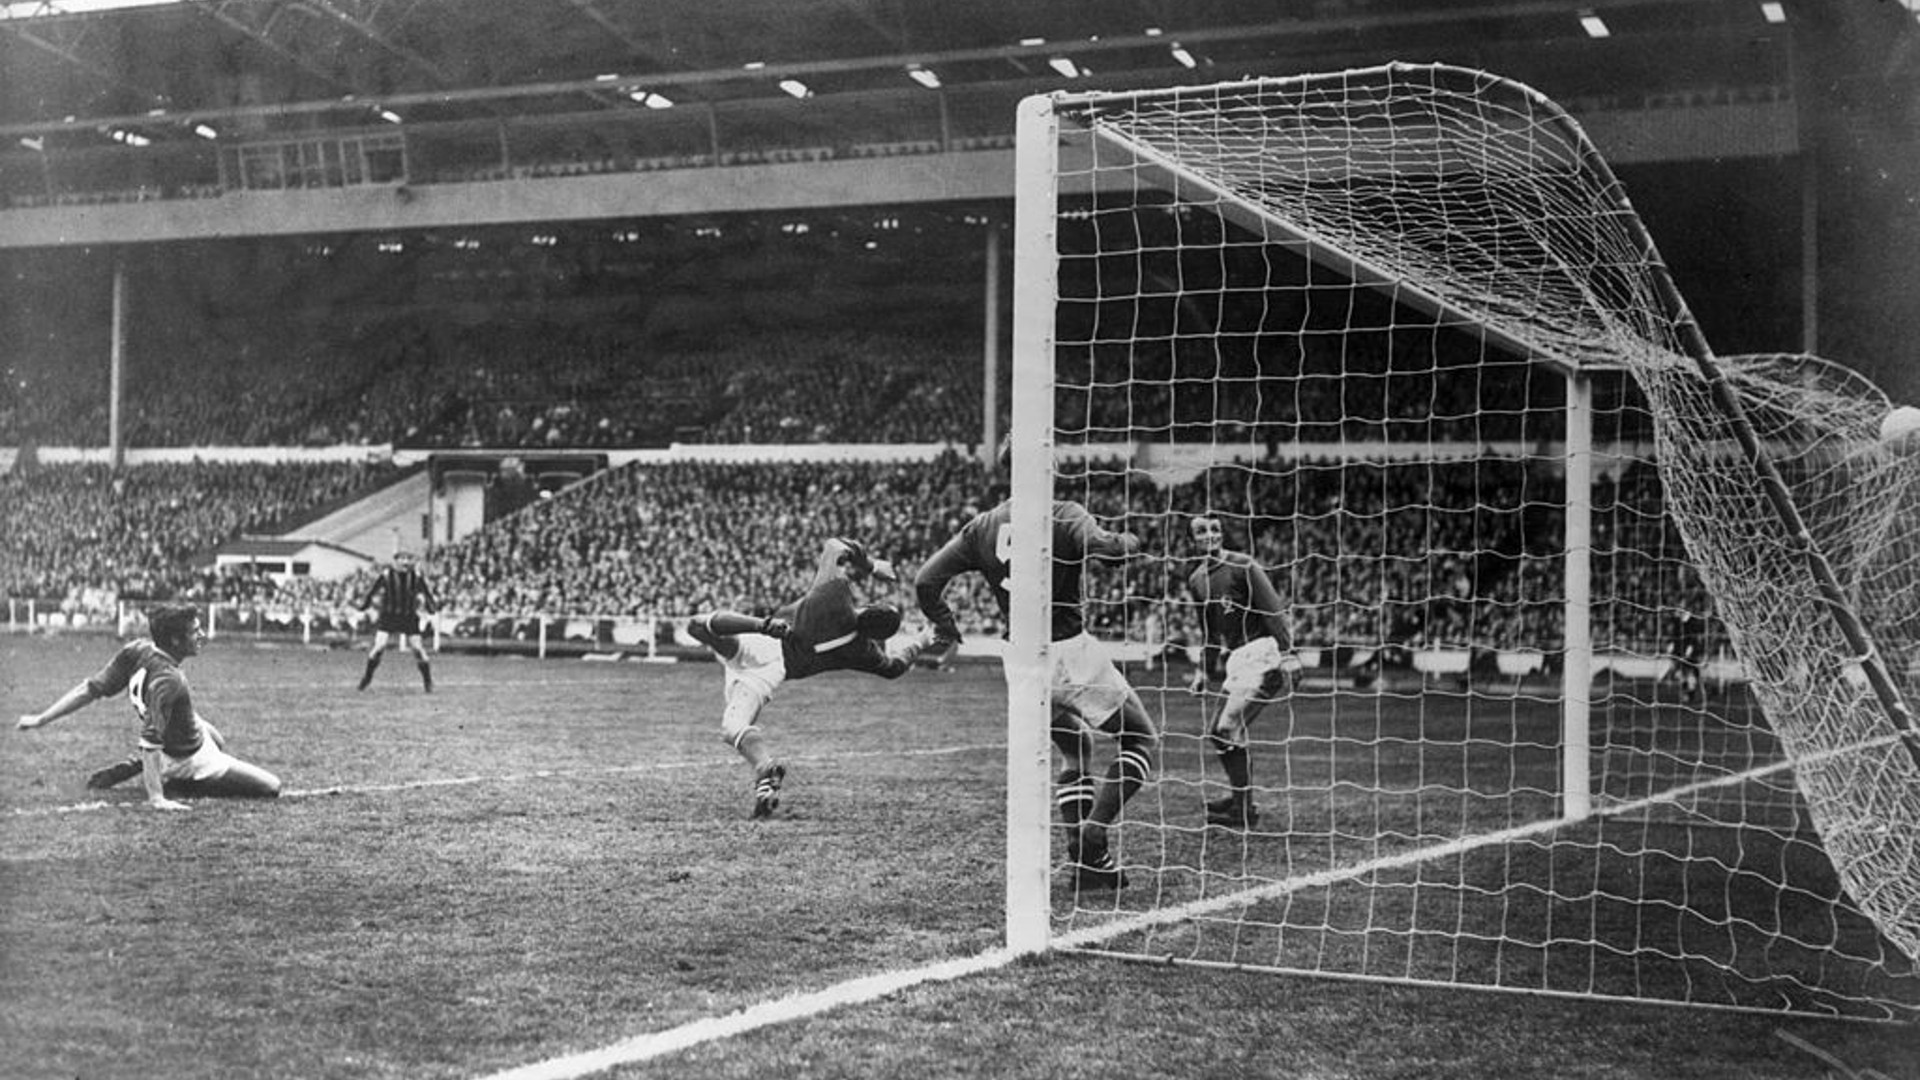 MAGIC MOMENT: Neil Young's shot nestles in the back of the Leicester goal to secure FA Cup glory in 1969